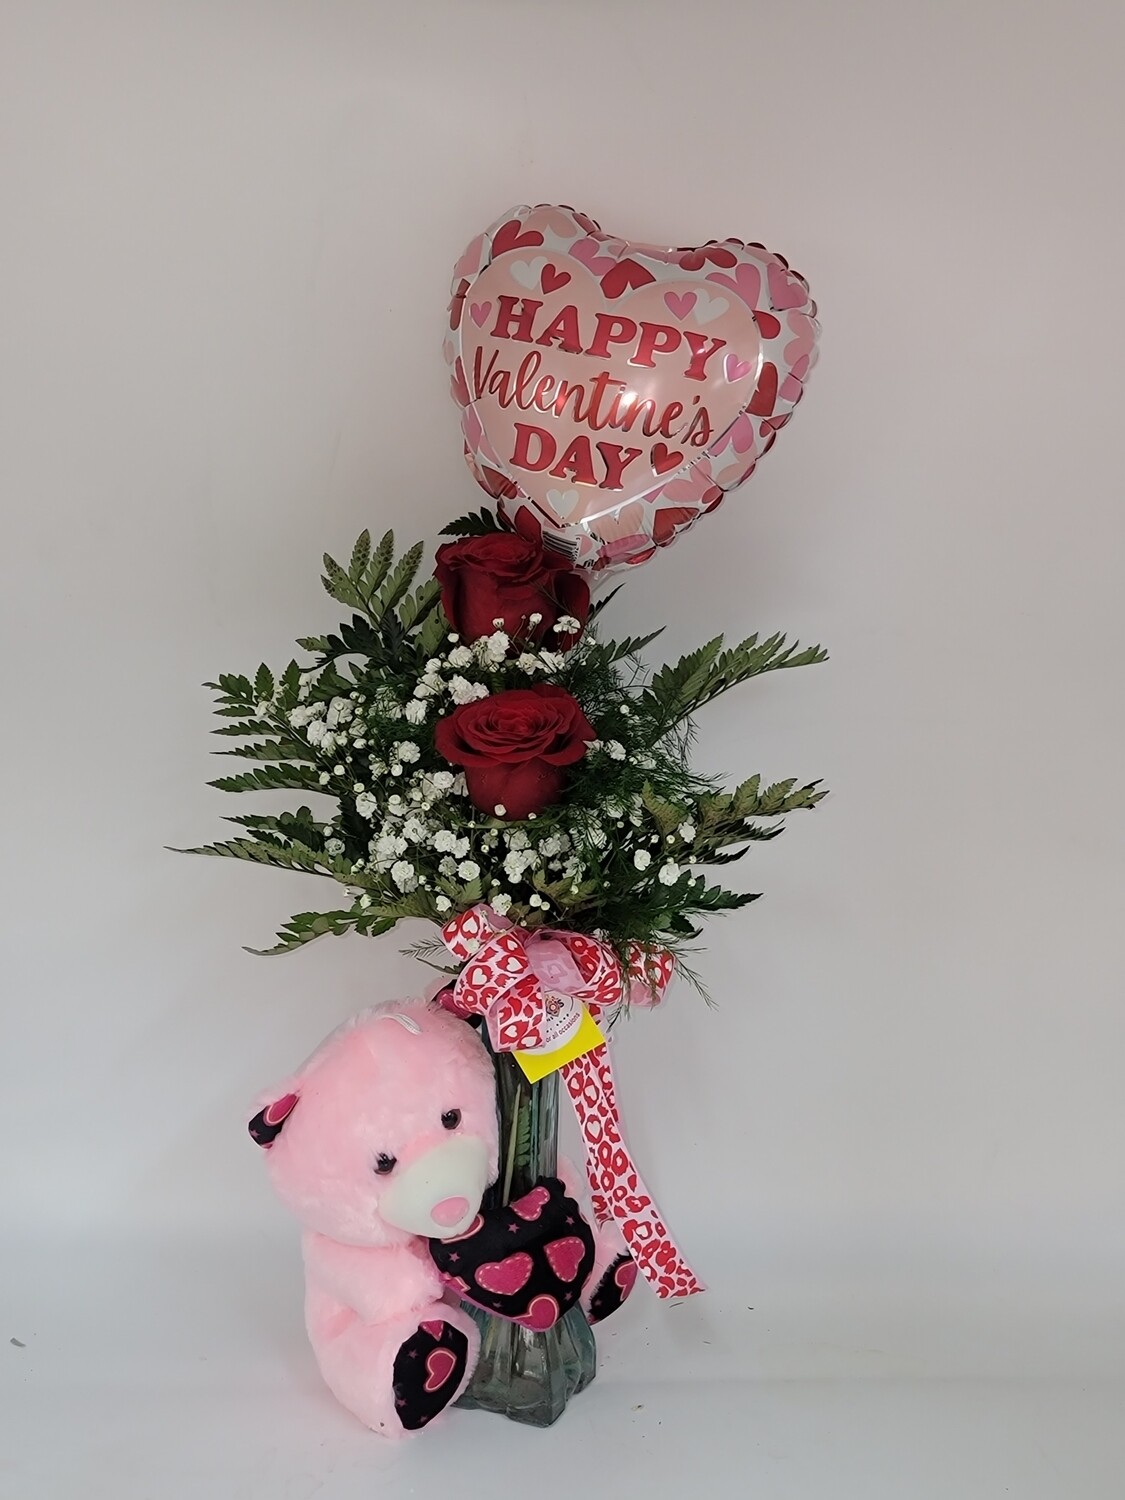 2 Rose's in a vase, 1 balloon and a teddy